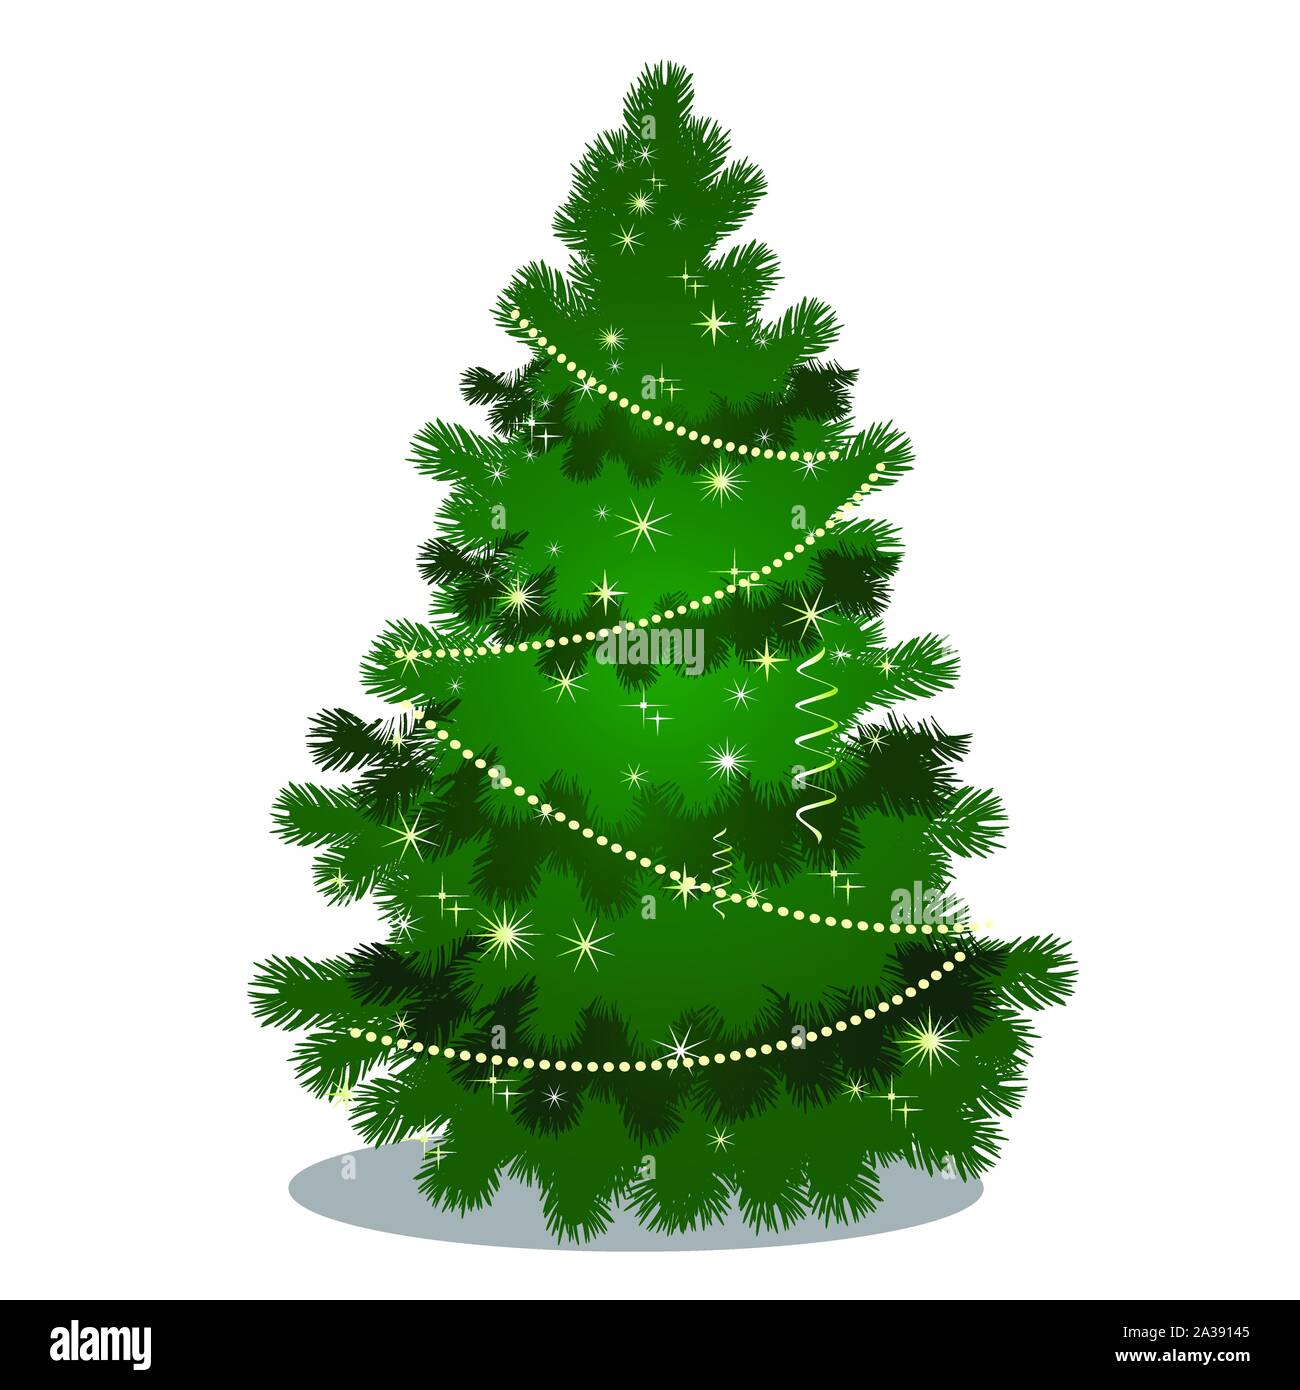 Green Christmas tree with beads and sparkling flecks isolated on white background. Sketch of Christmas festive poster, party invitation, other holiday Stock Vector